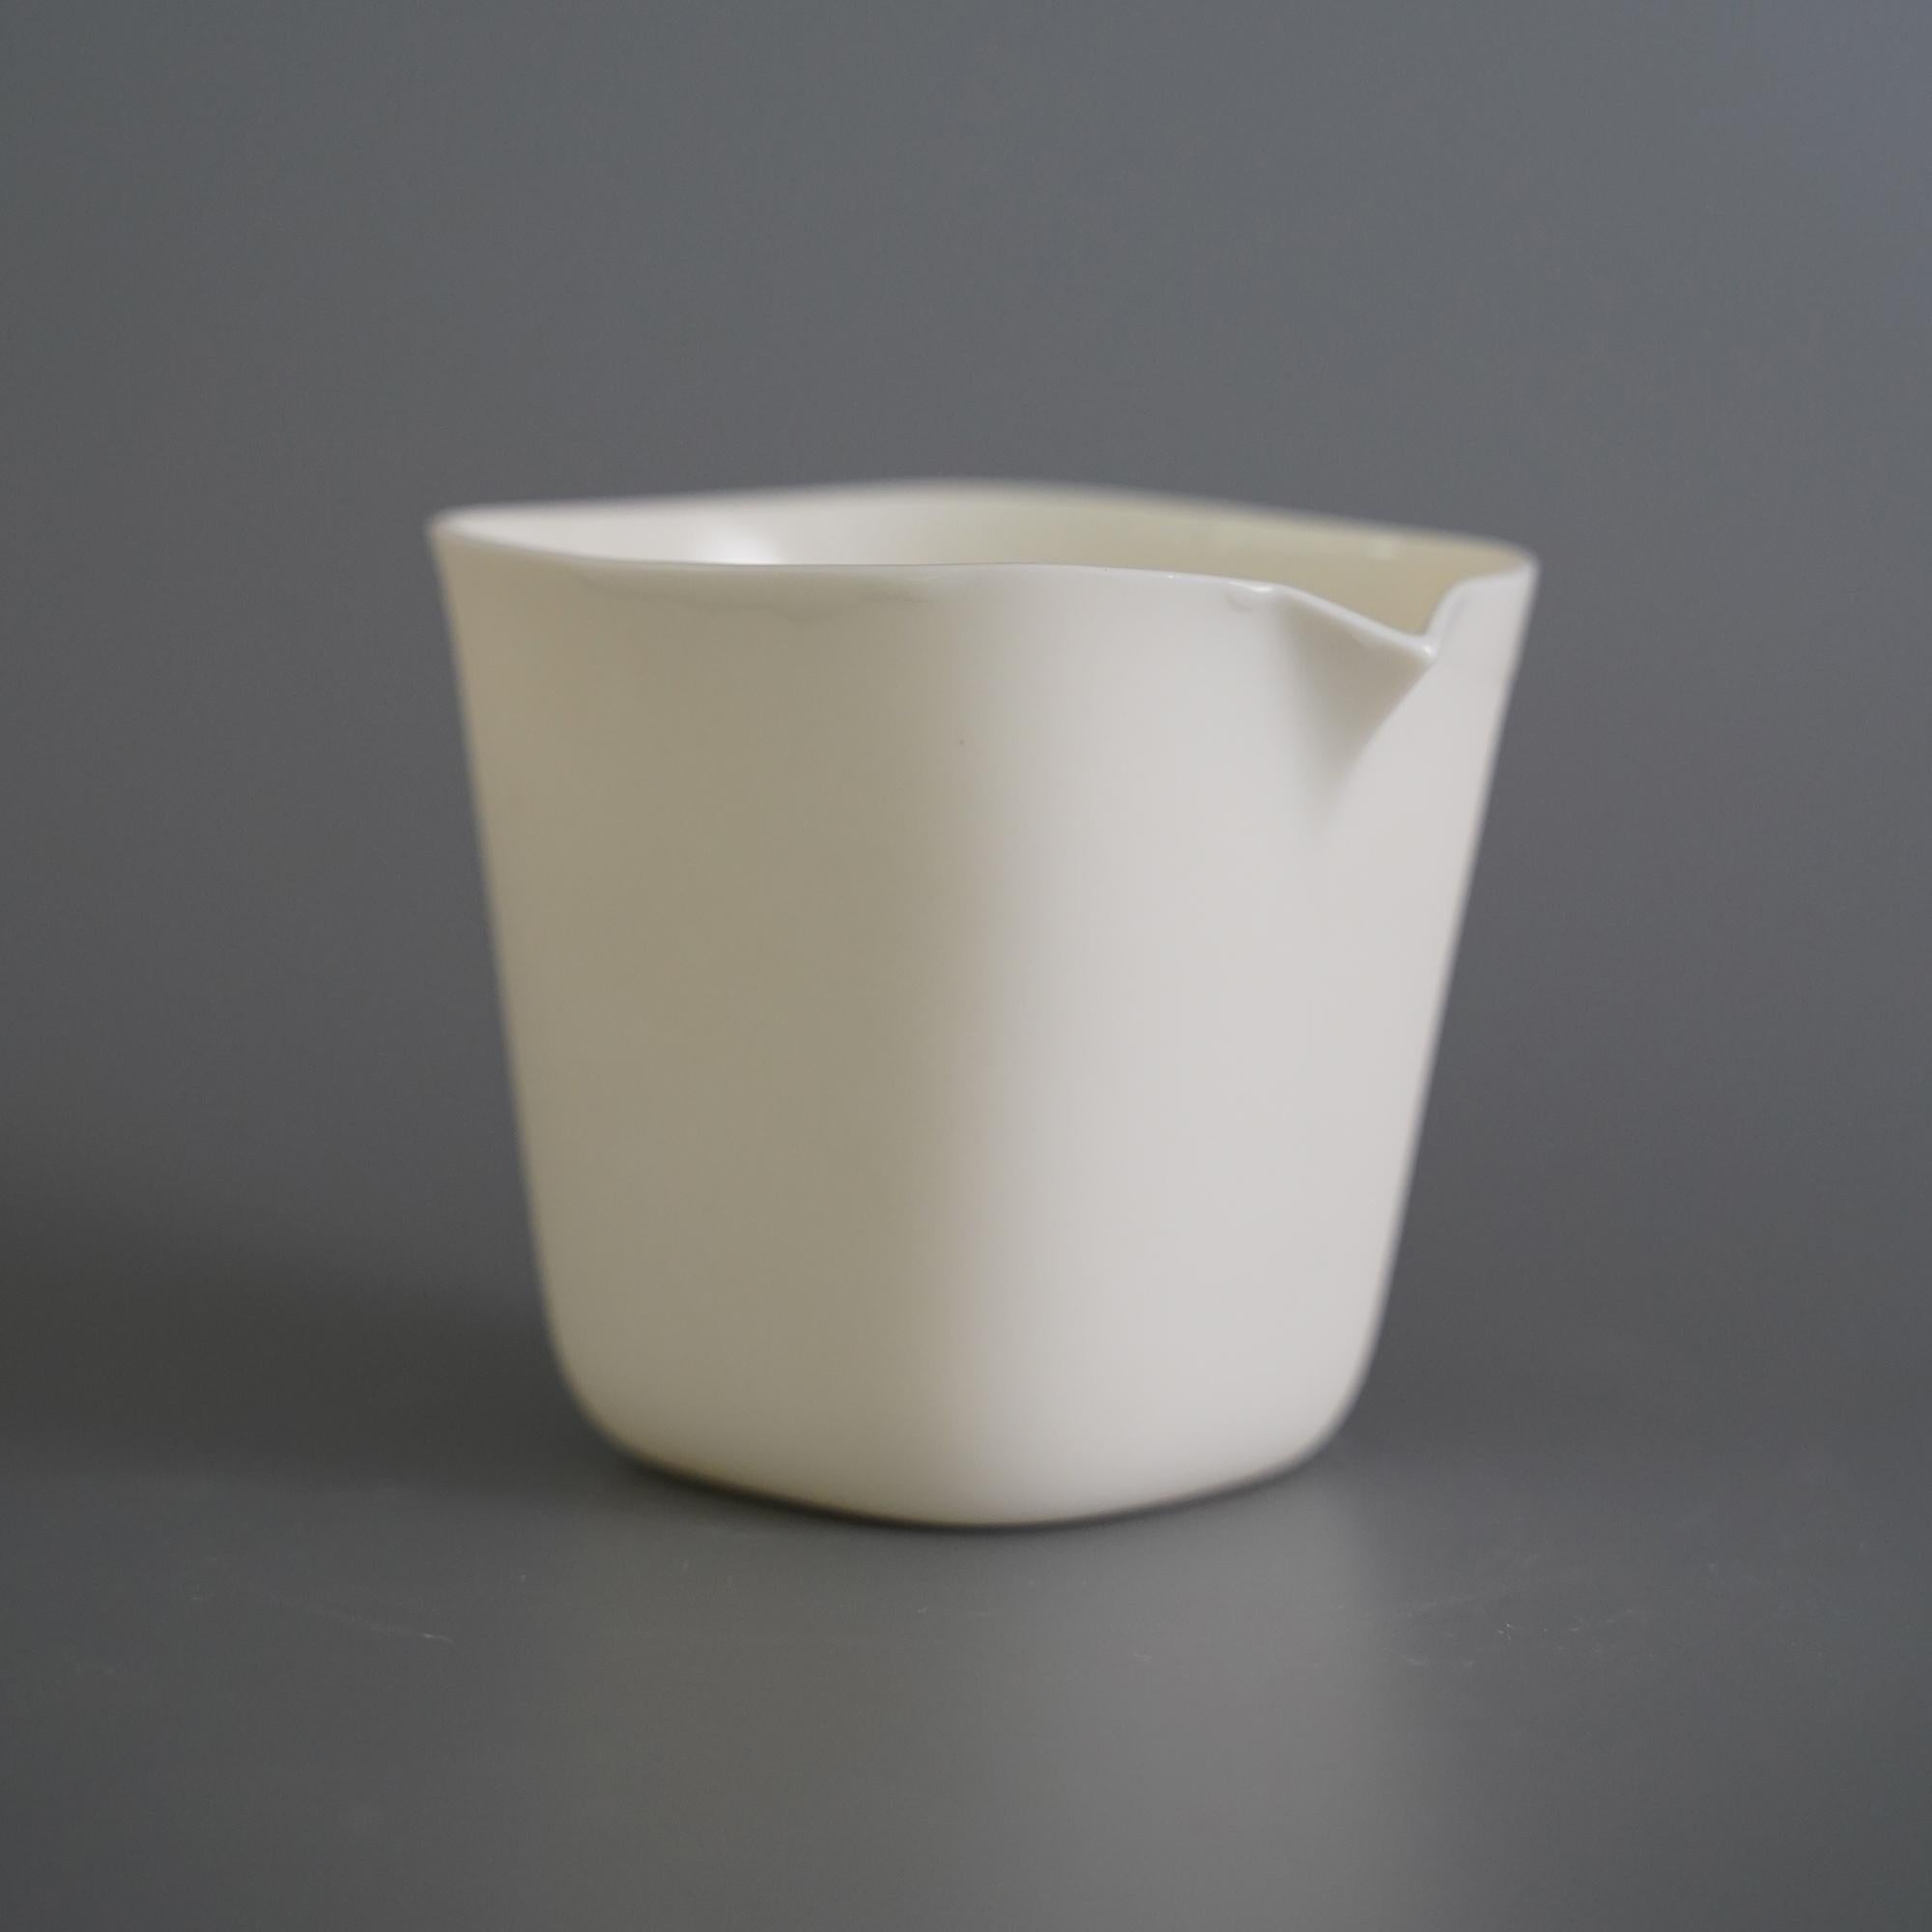 Set of 4 Ceti serving bowl by Studio Cúze.
Dimensions: D 9 x W 8 x H 8 cm.
Materials: ceramic

Ceti is a handmade, white ceramic dispenser that offers a very smooth surface. The interior has been coated with a glaze that allows a slight